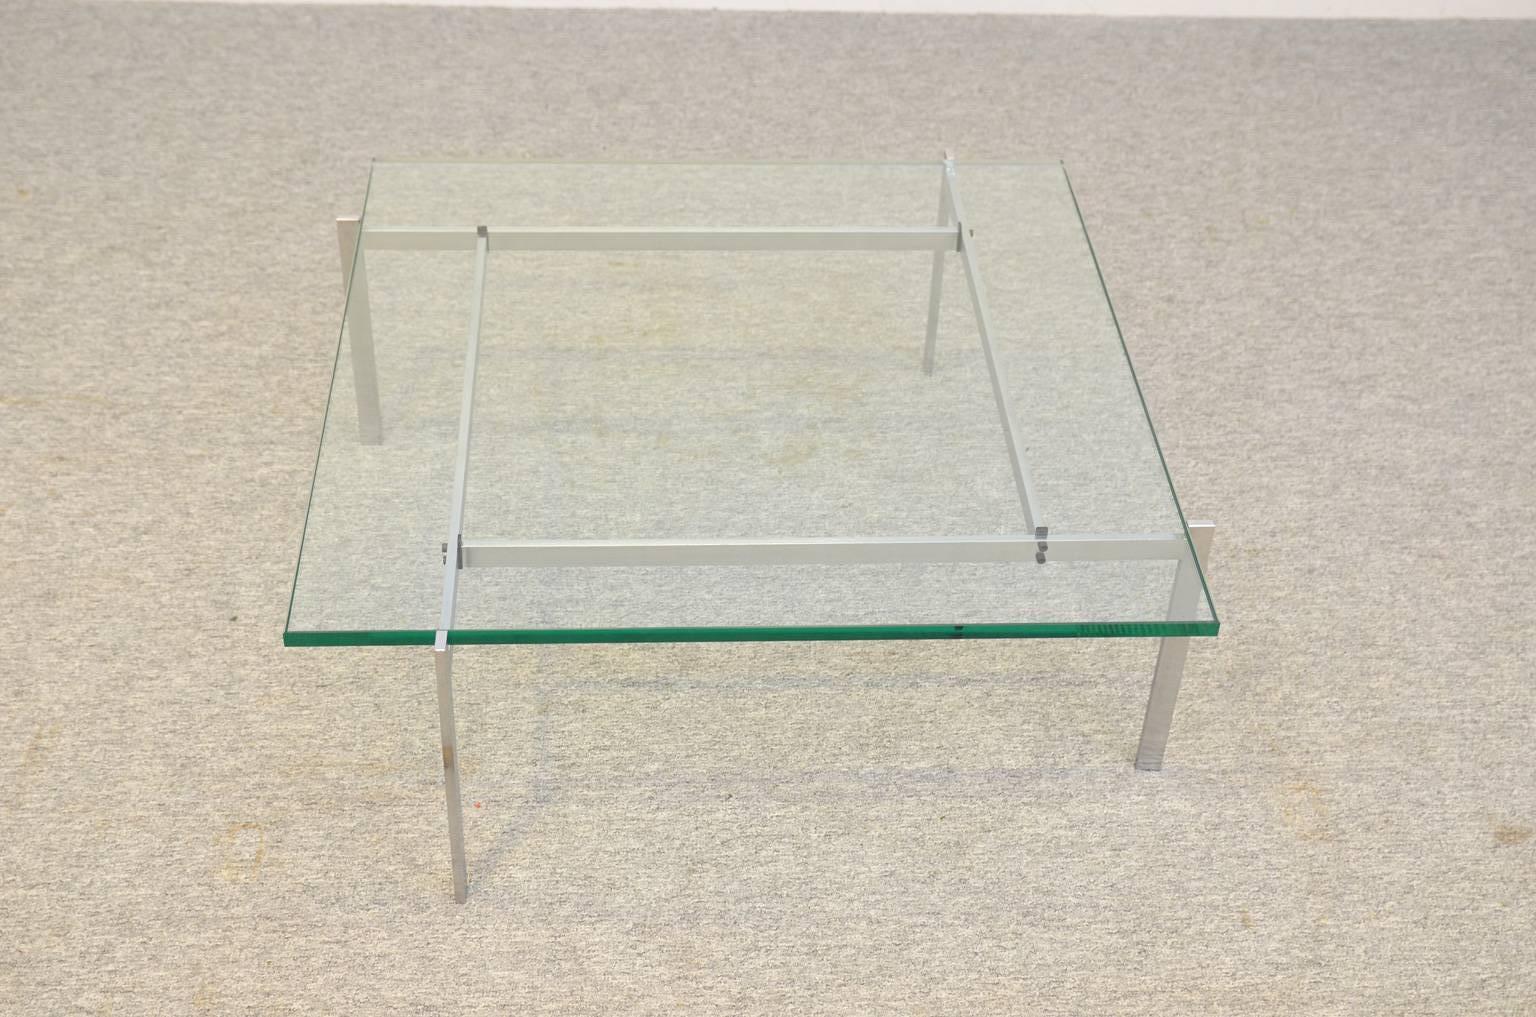 Early production midcentury coffee table by Poul Kjaerholm, manufactured by E. Kold Christensen. The stamp of the manufacturer is present on the base (image 10). The glass tabletop is renewed.